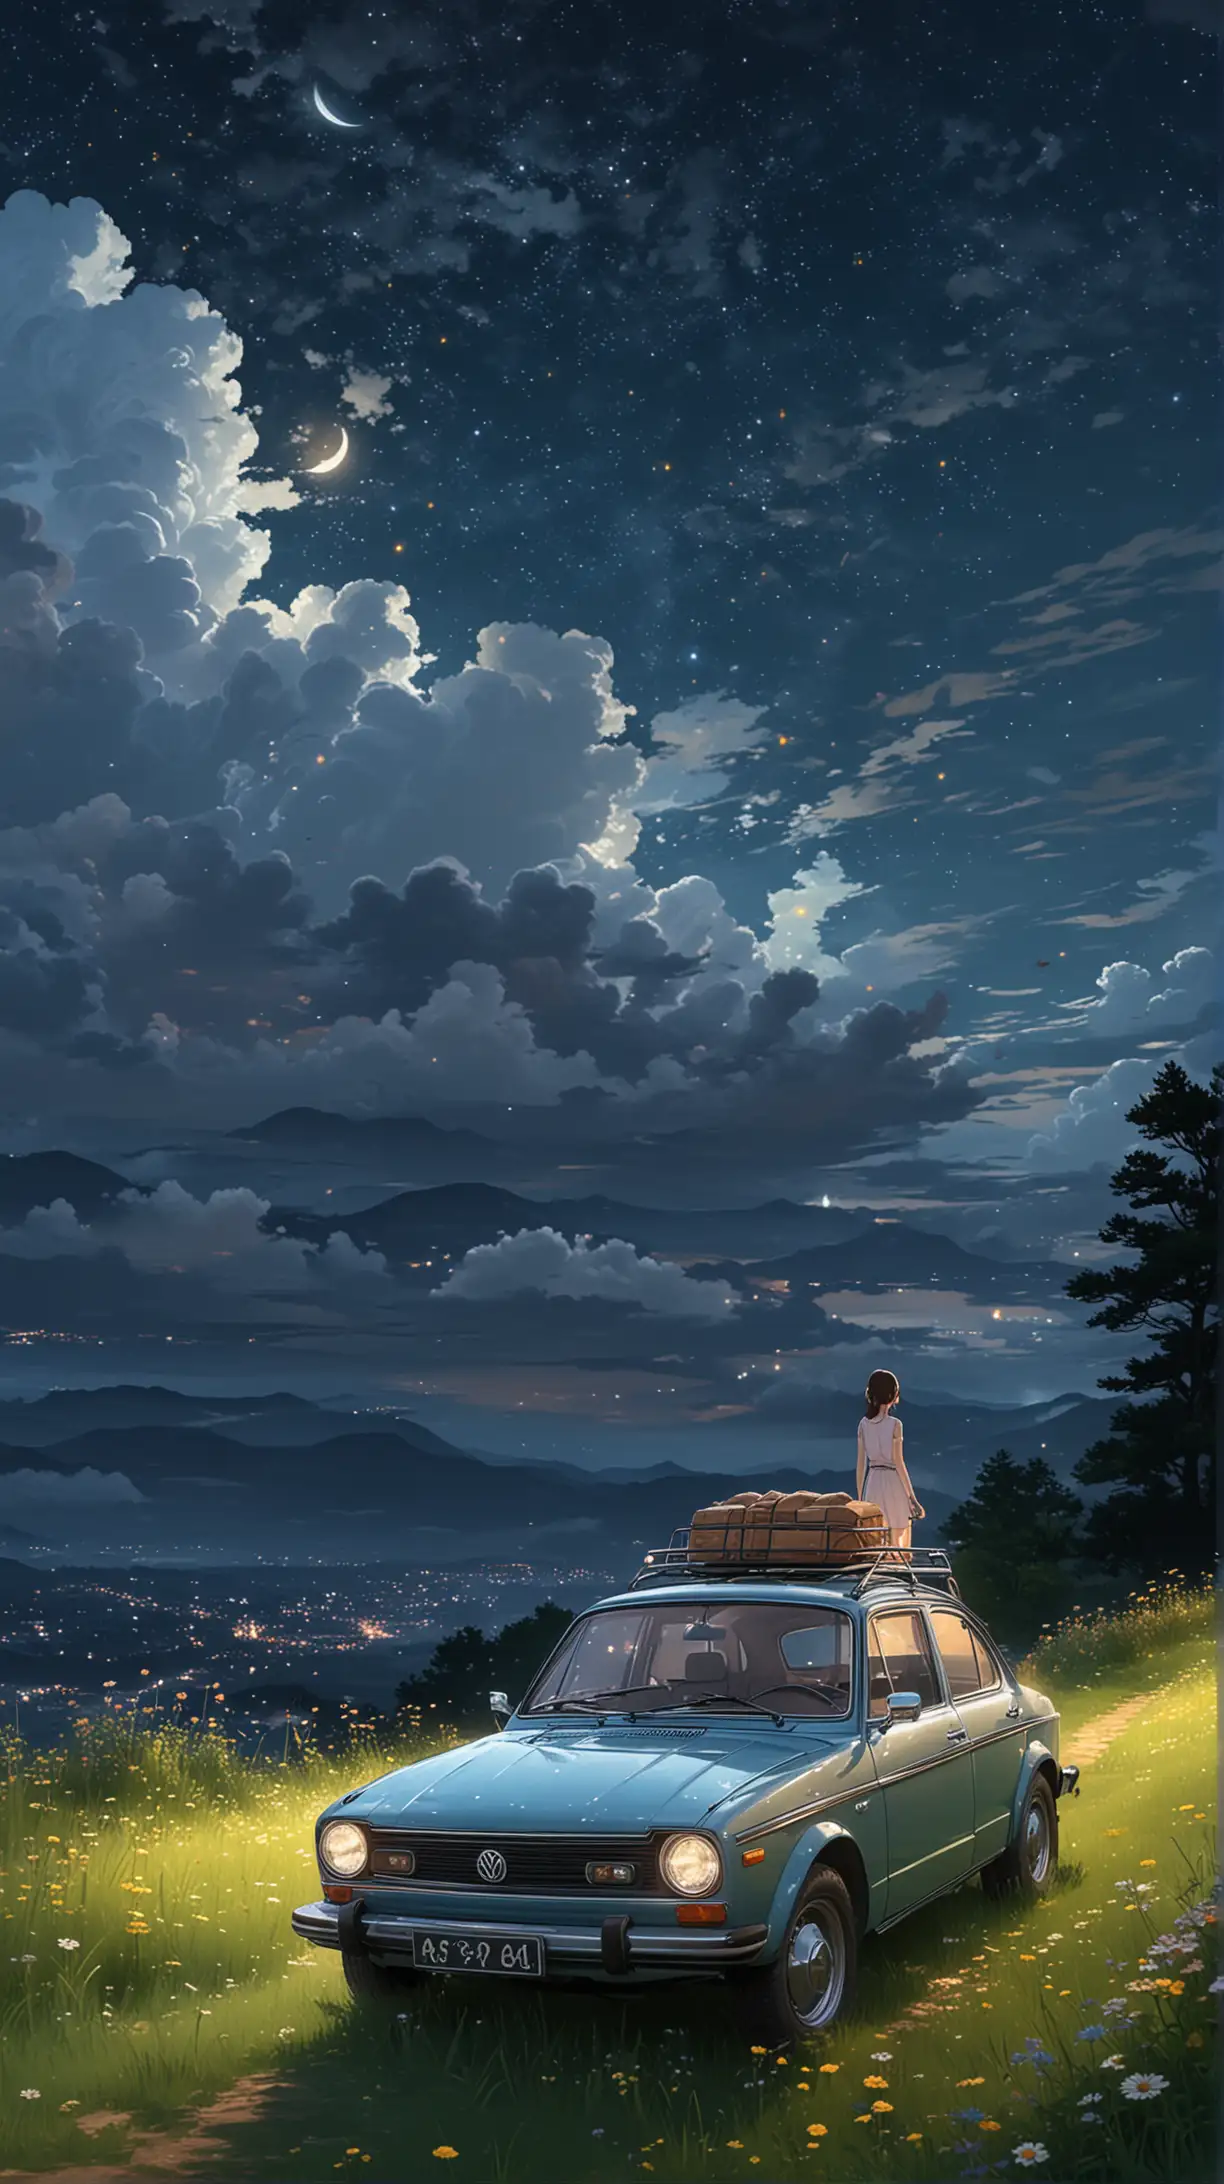 Youthful Duo on VW Car Roof Amidst Starry Sky and Fluffy Clouds